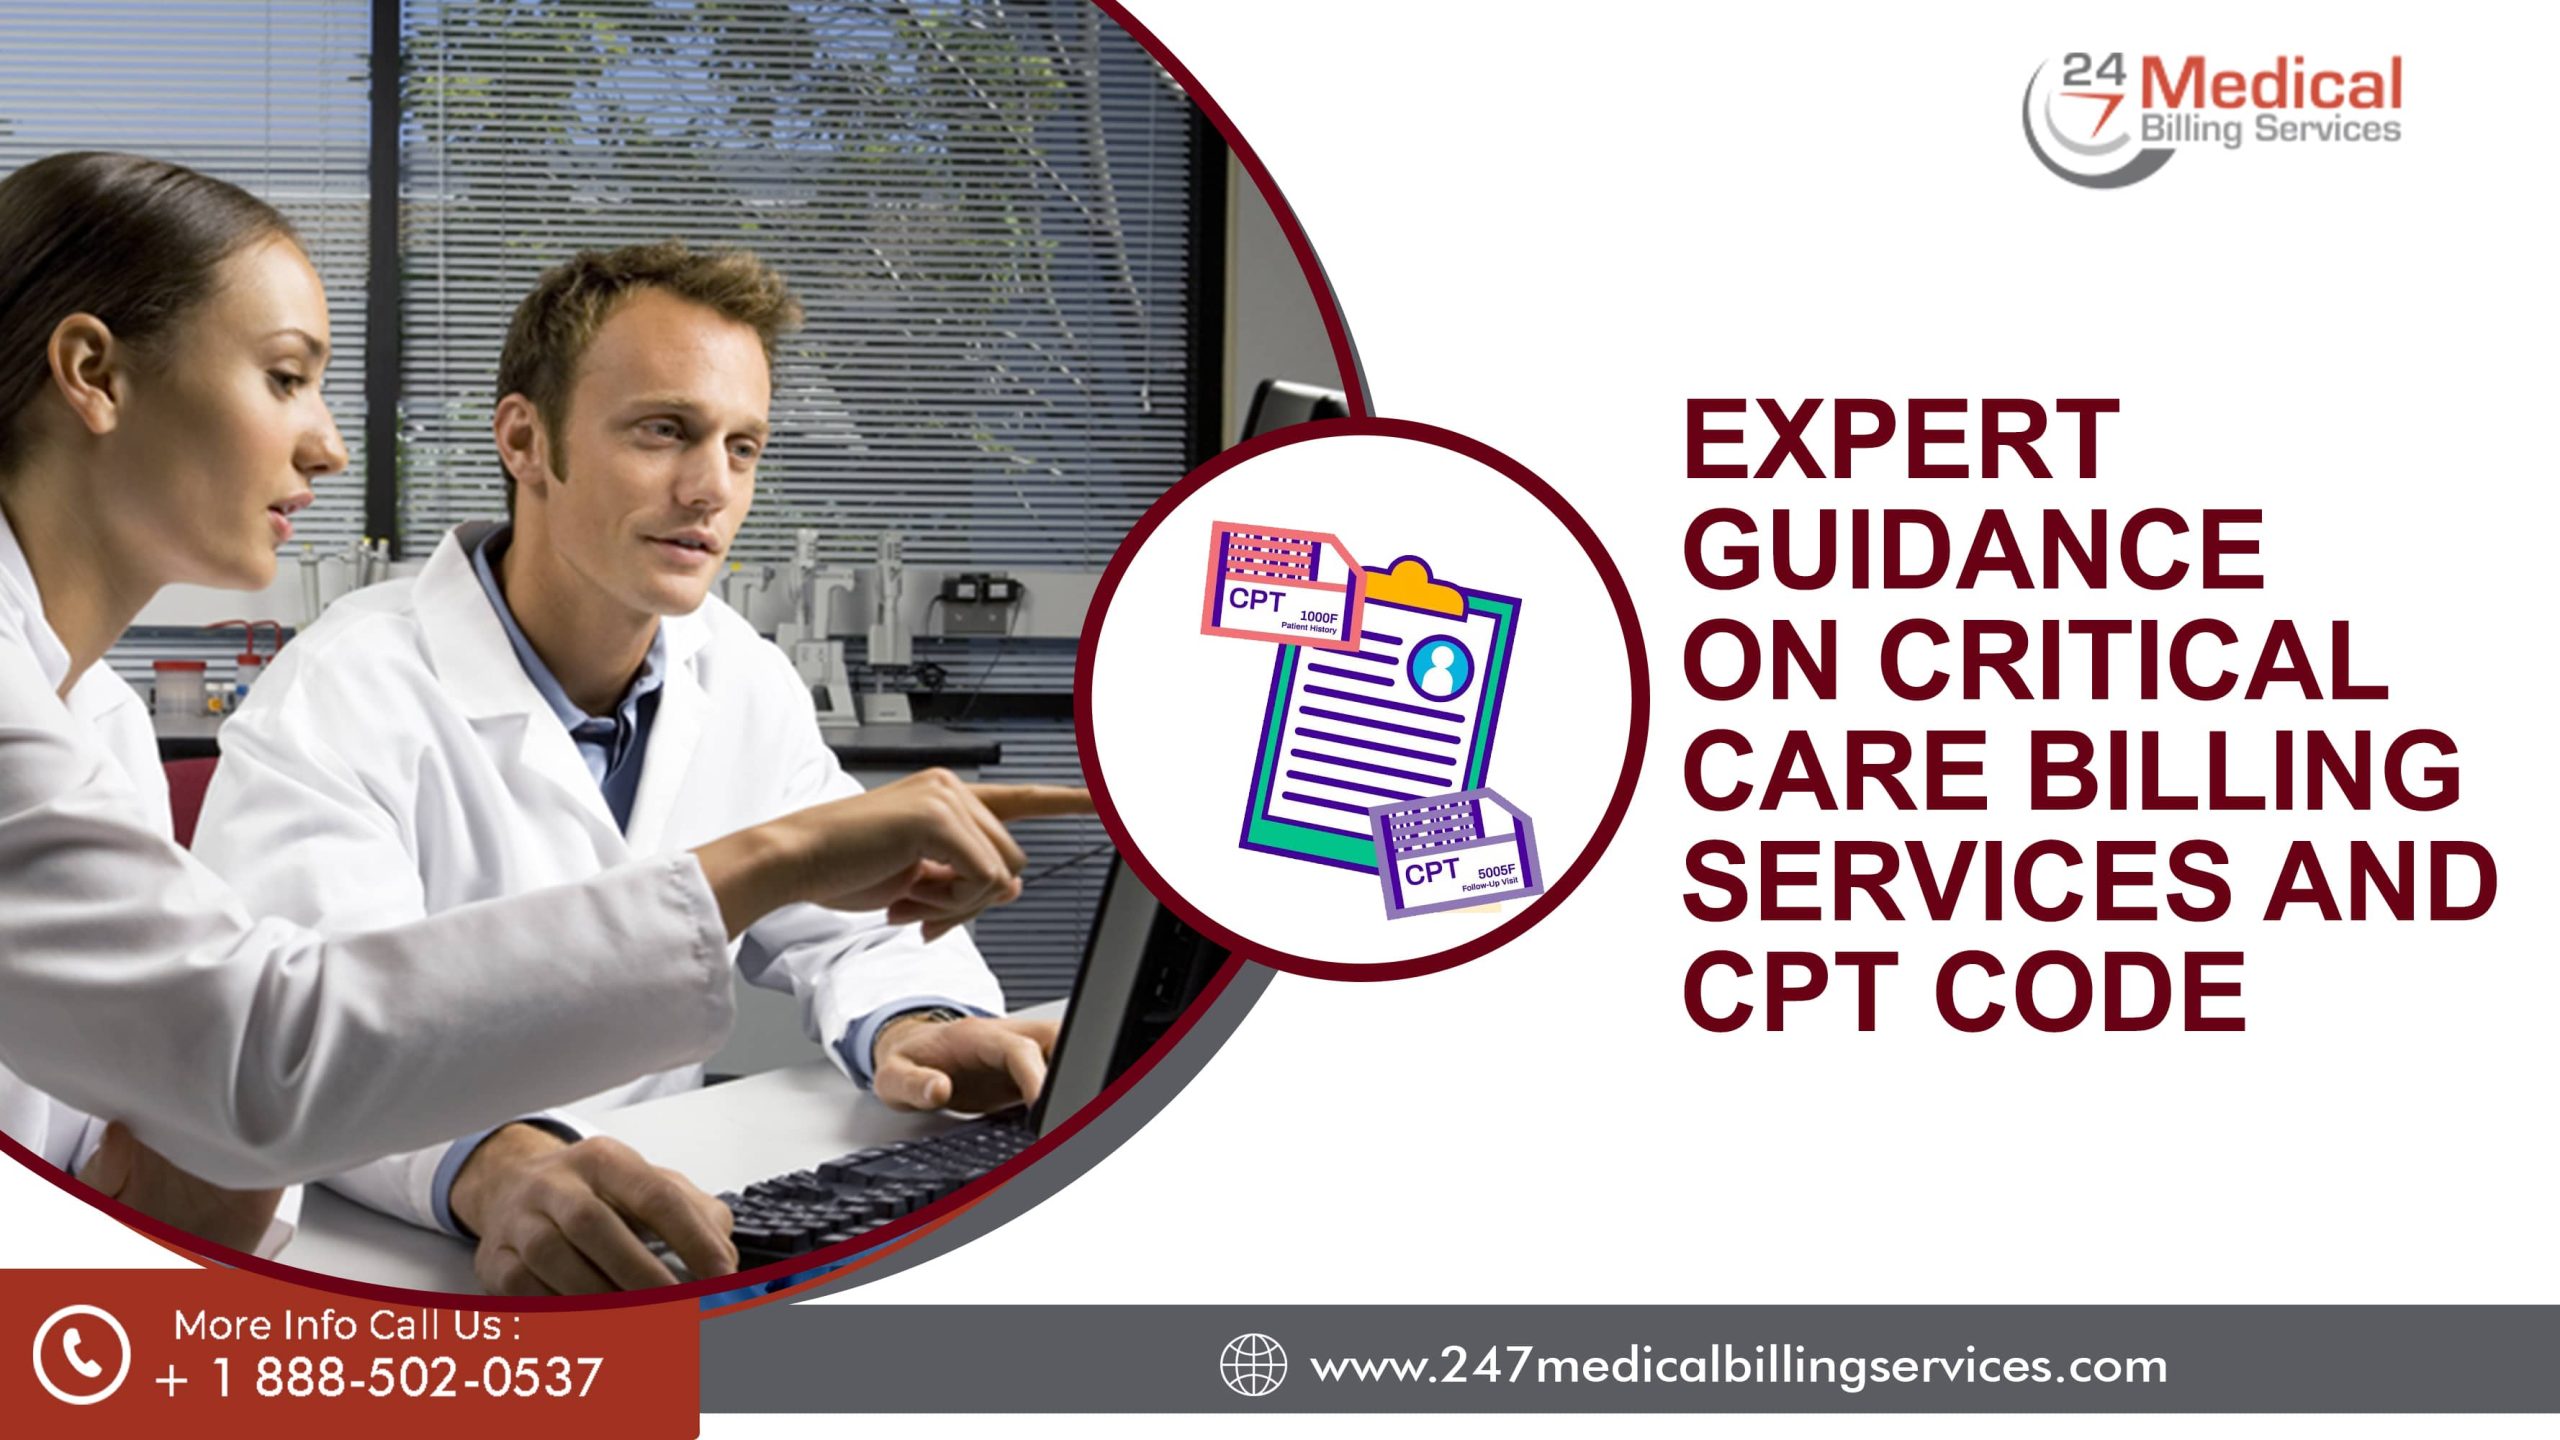  Expert Guidance on Critical Care Billing Services and CPT Code